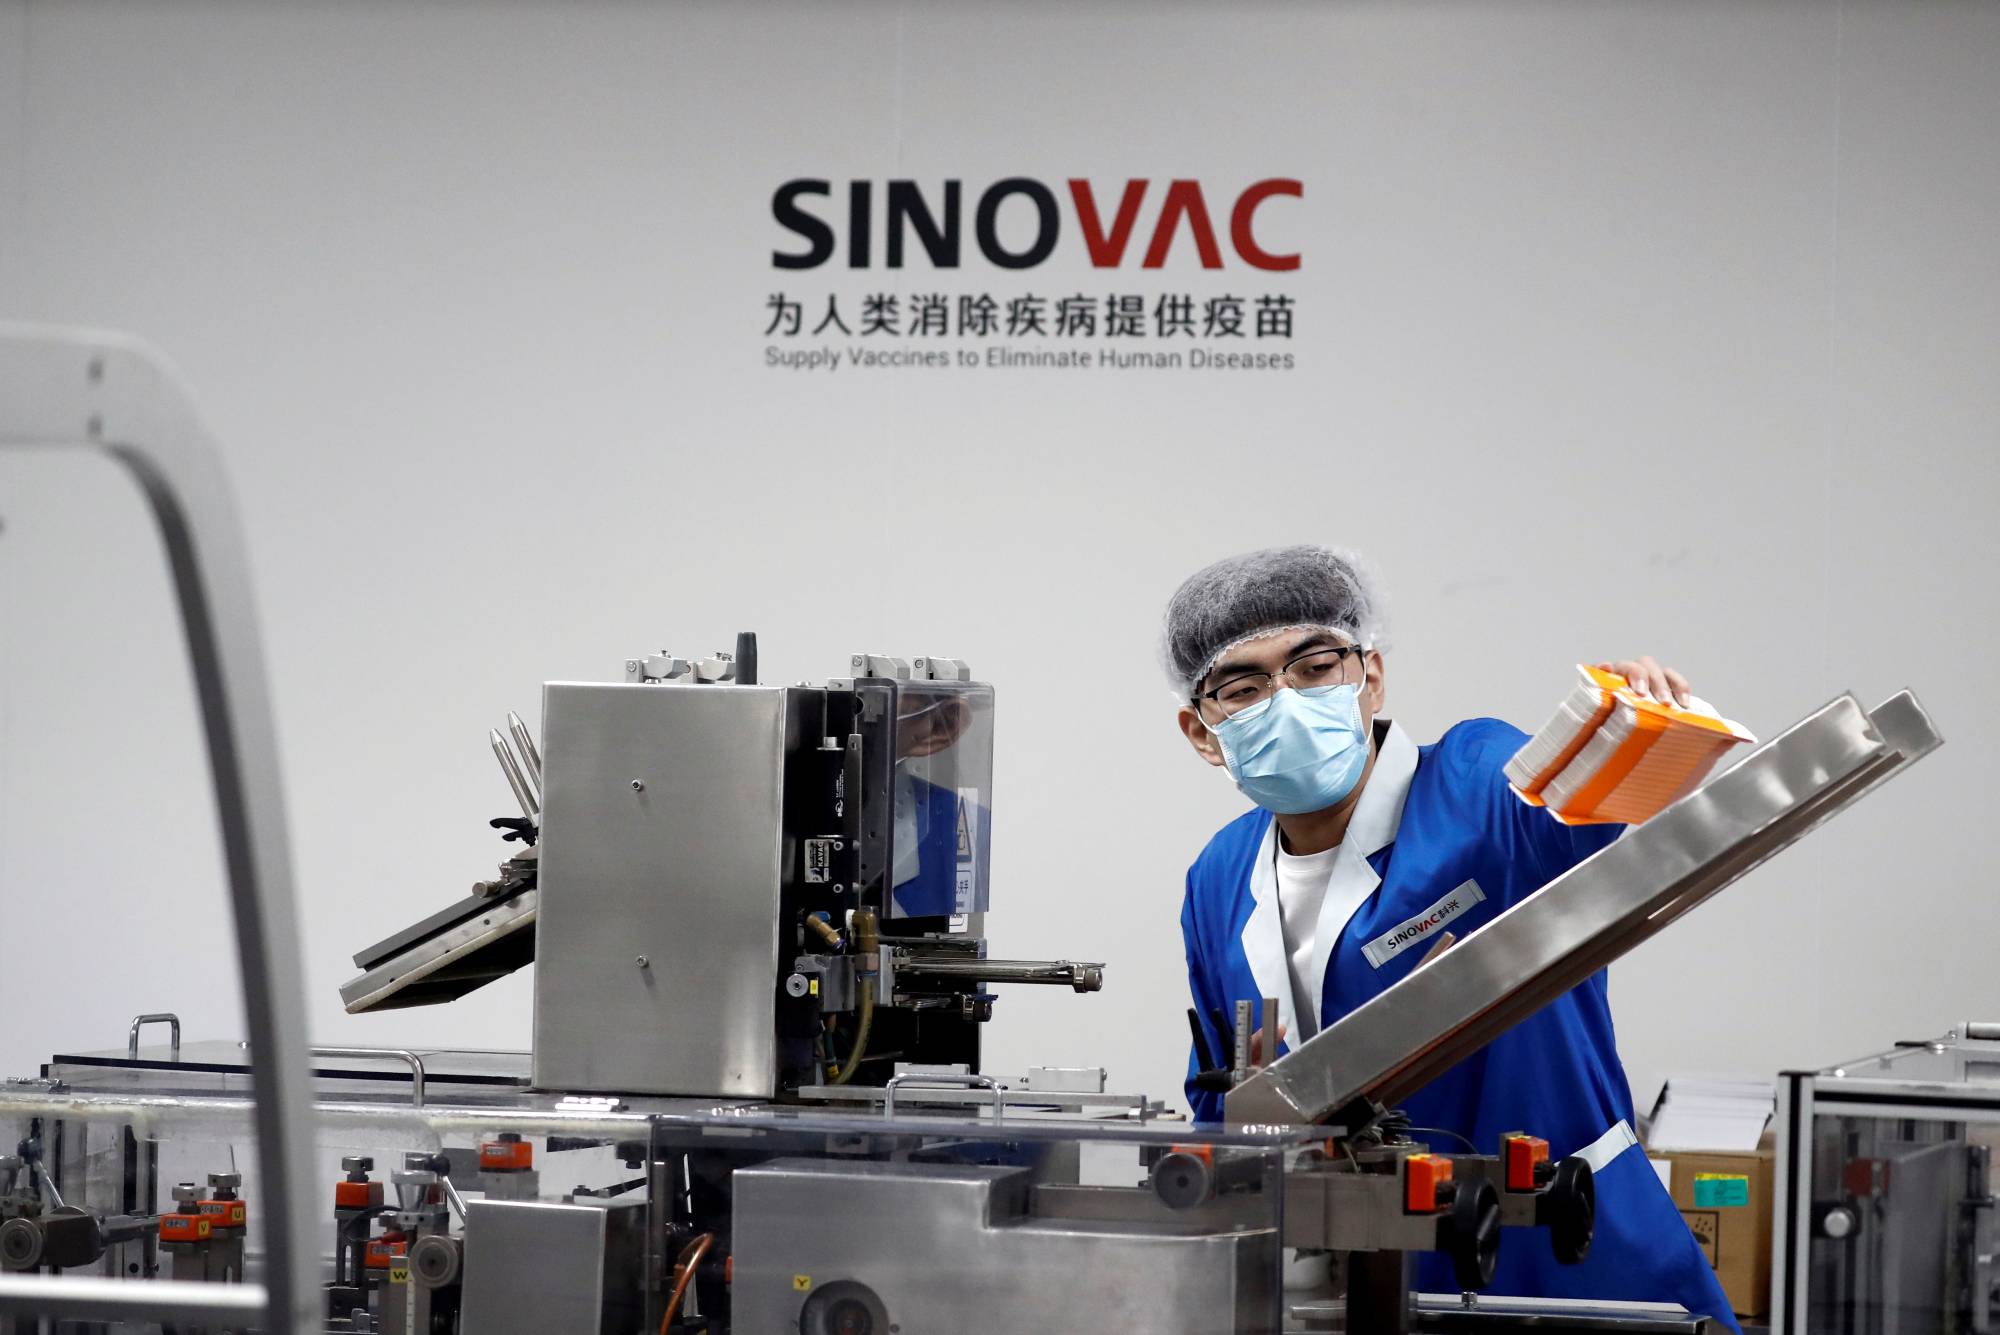 A man works in a Beijing packaging facility of Chinese vaccine-maker Sinovac Biotech, which is developing an experimental coronavirus disease vaccine, during a government-organized media tour on Sept. 24. | REUTERS